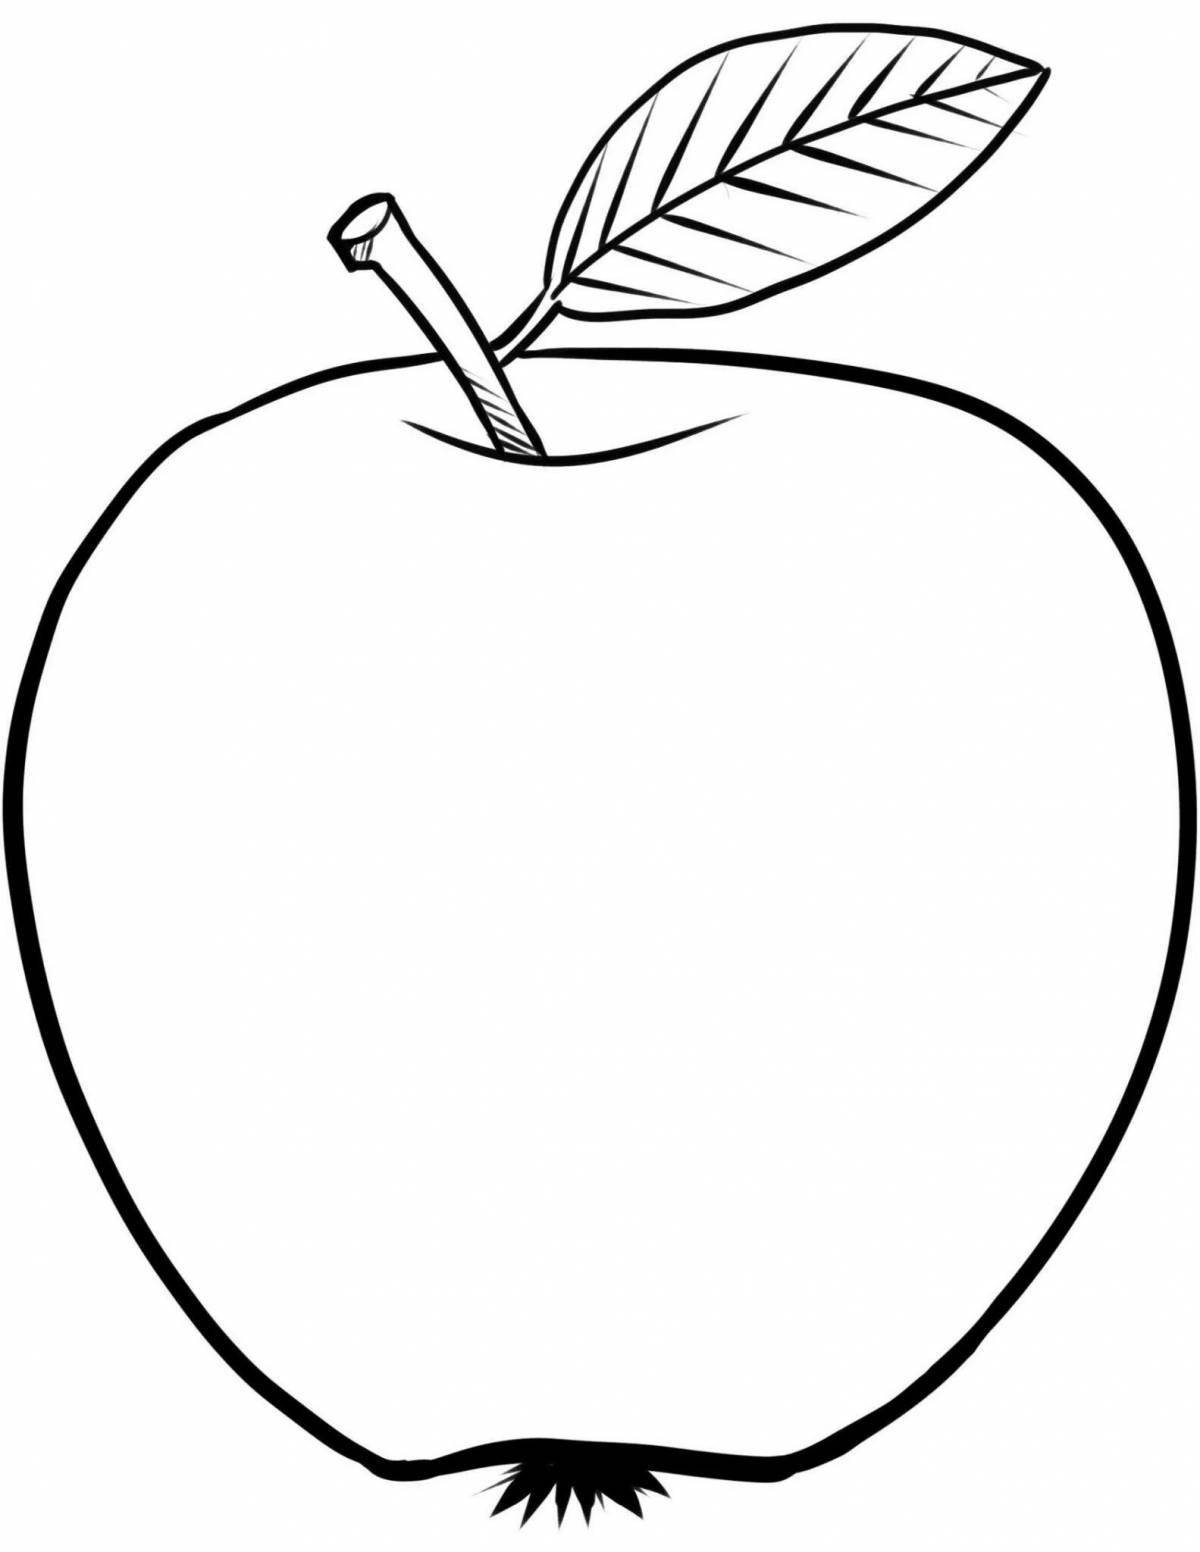 Glittering Apple Coloring Page